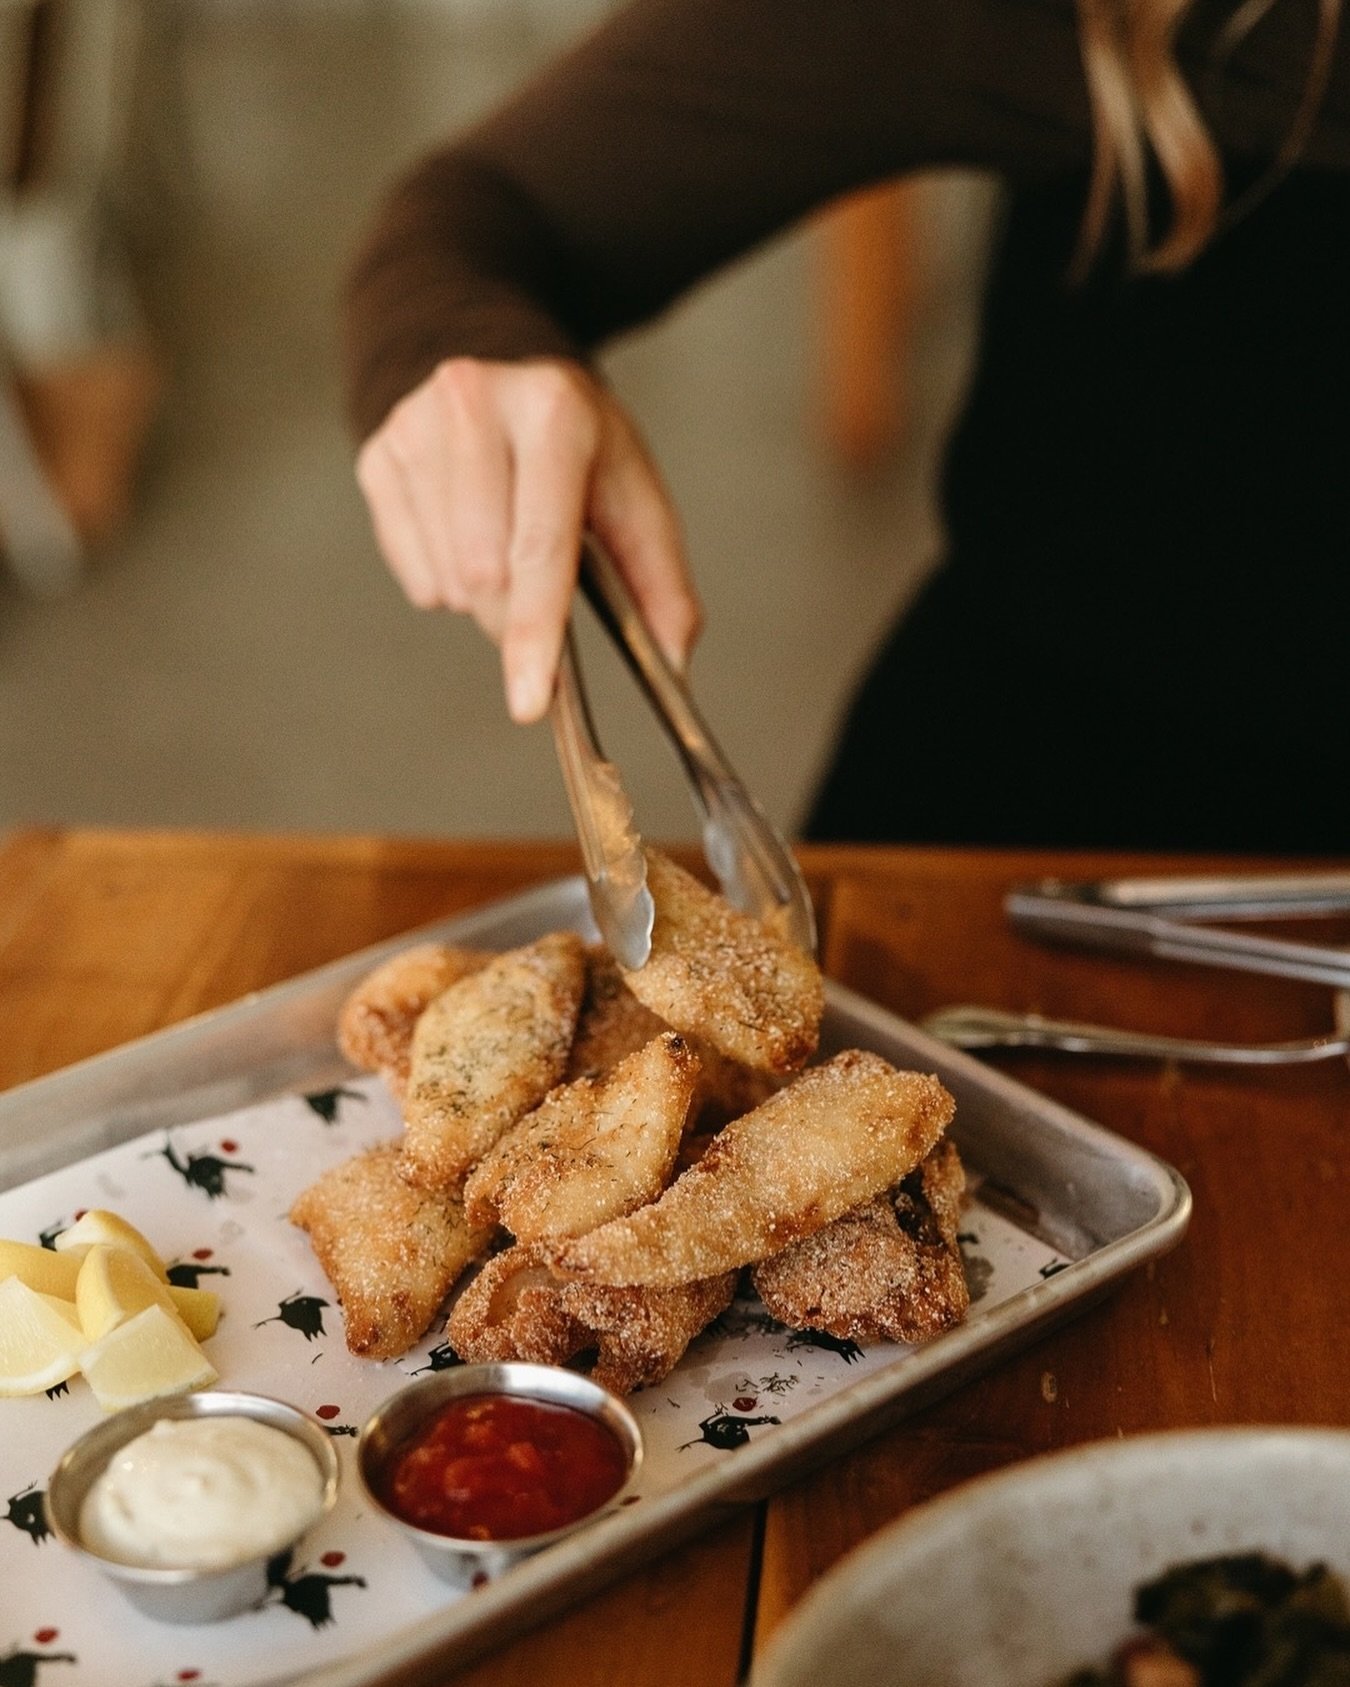 Join us for a Friday Night Fish Fry! Reservations are available on Resy on April 12, May 17 &amp; June 21. Reel &lsquo;em in!
⠀⠀⠀⠀⠀⠀⠀⠀⠀
Enjoy a four course family style fish fry dinner. Featuring wild caught local fish and ingredients sourced from Co